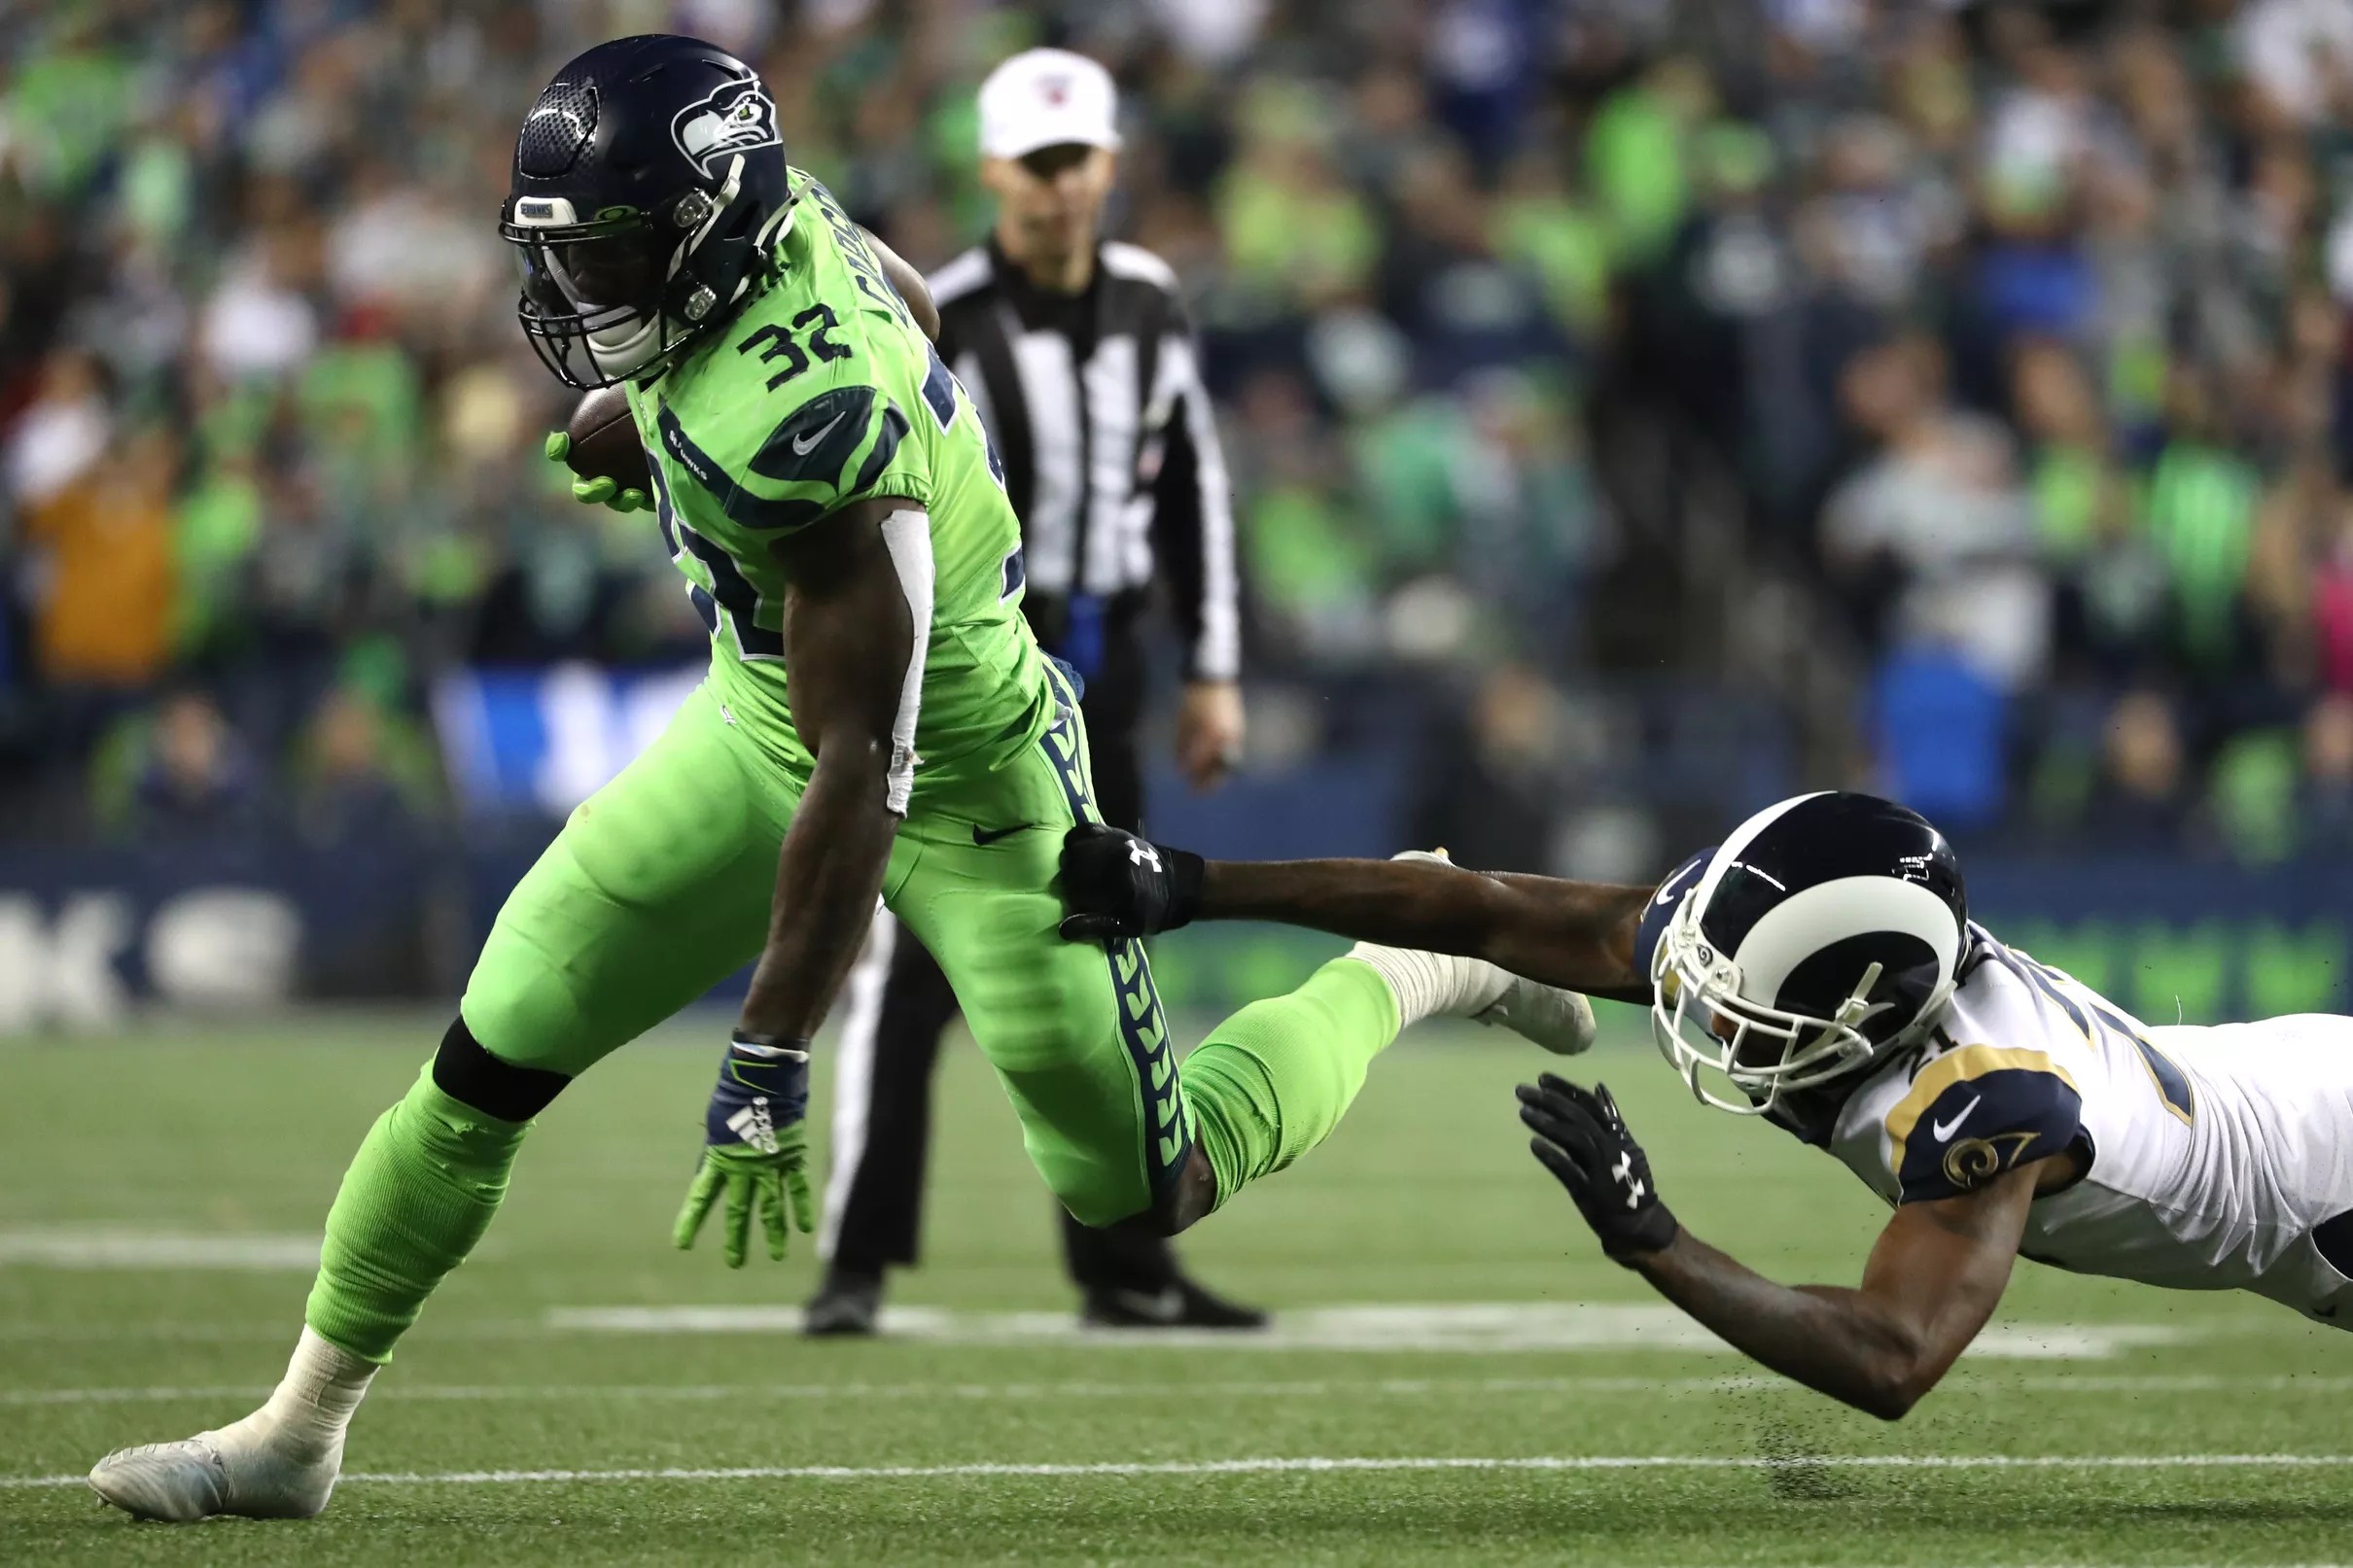 NFL flexes it flex scheduling powers, moves SeahawksRams to featured